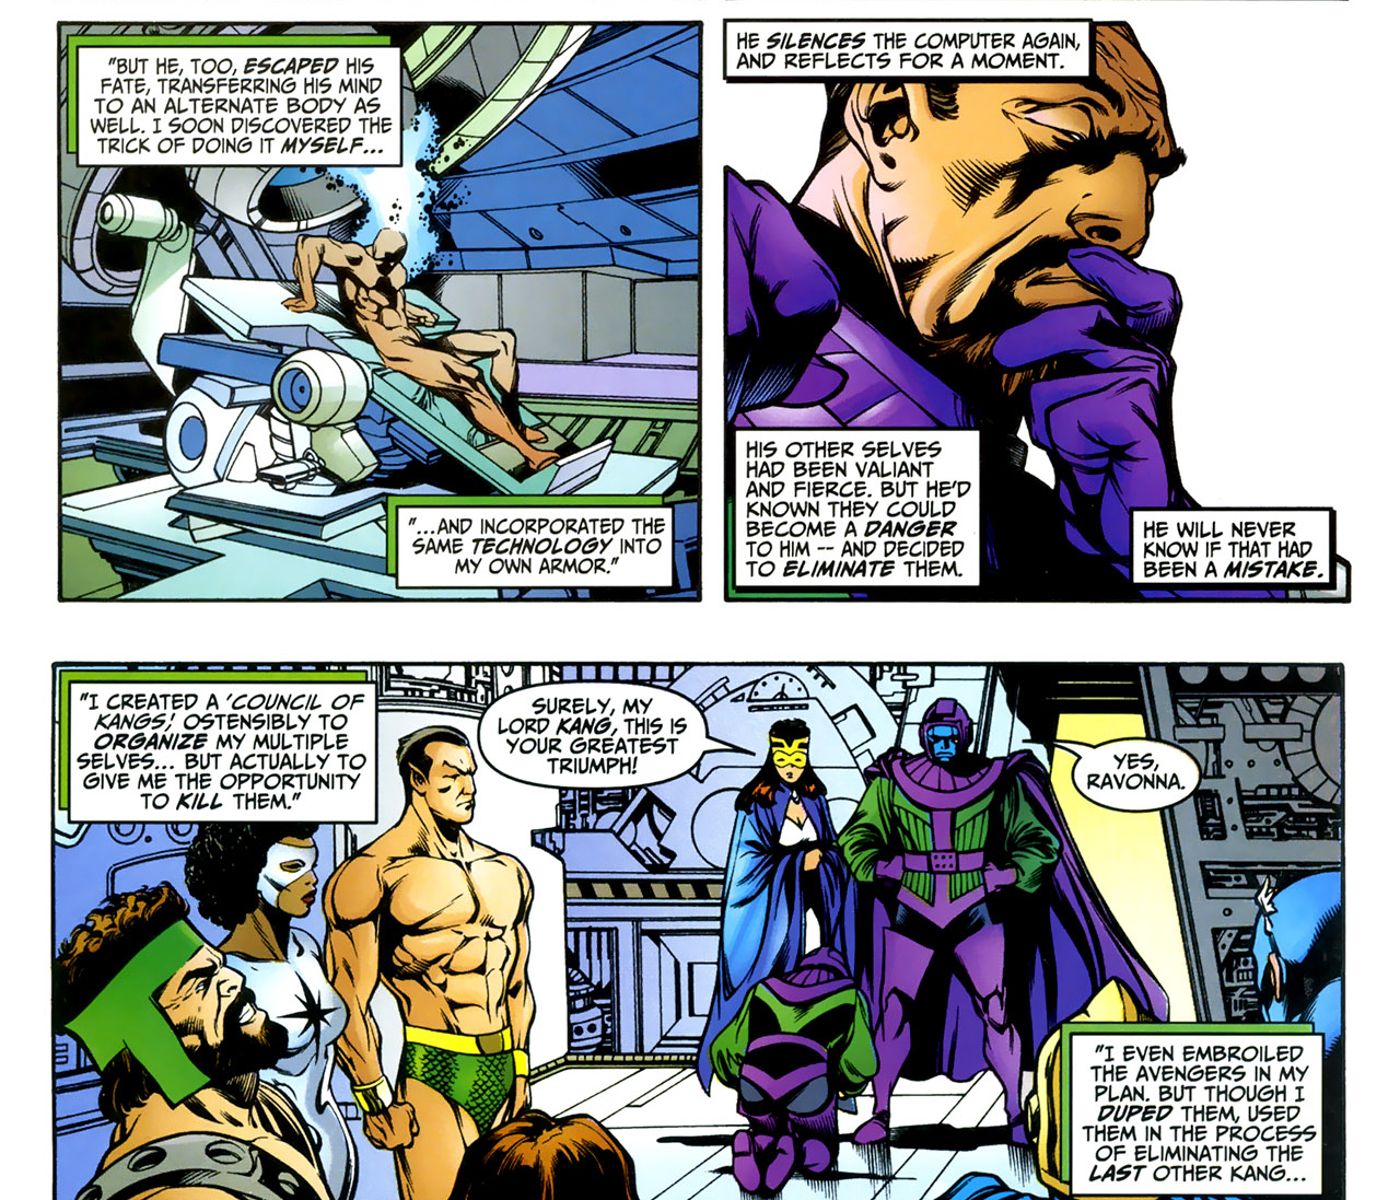 Kang the Conqueror develops cloning technology